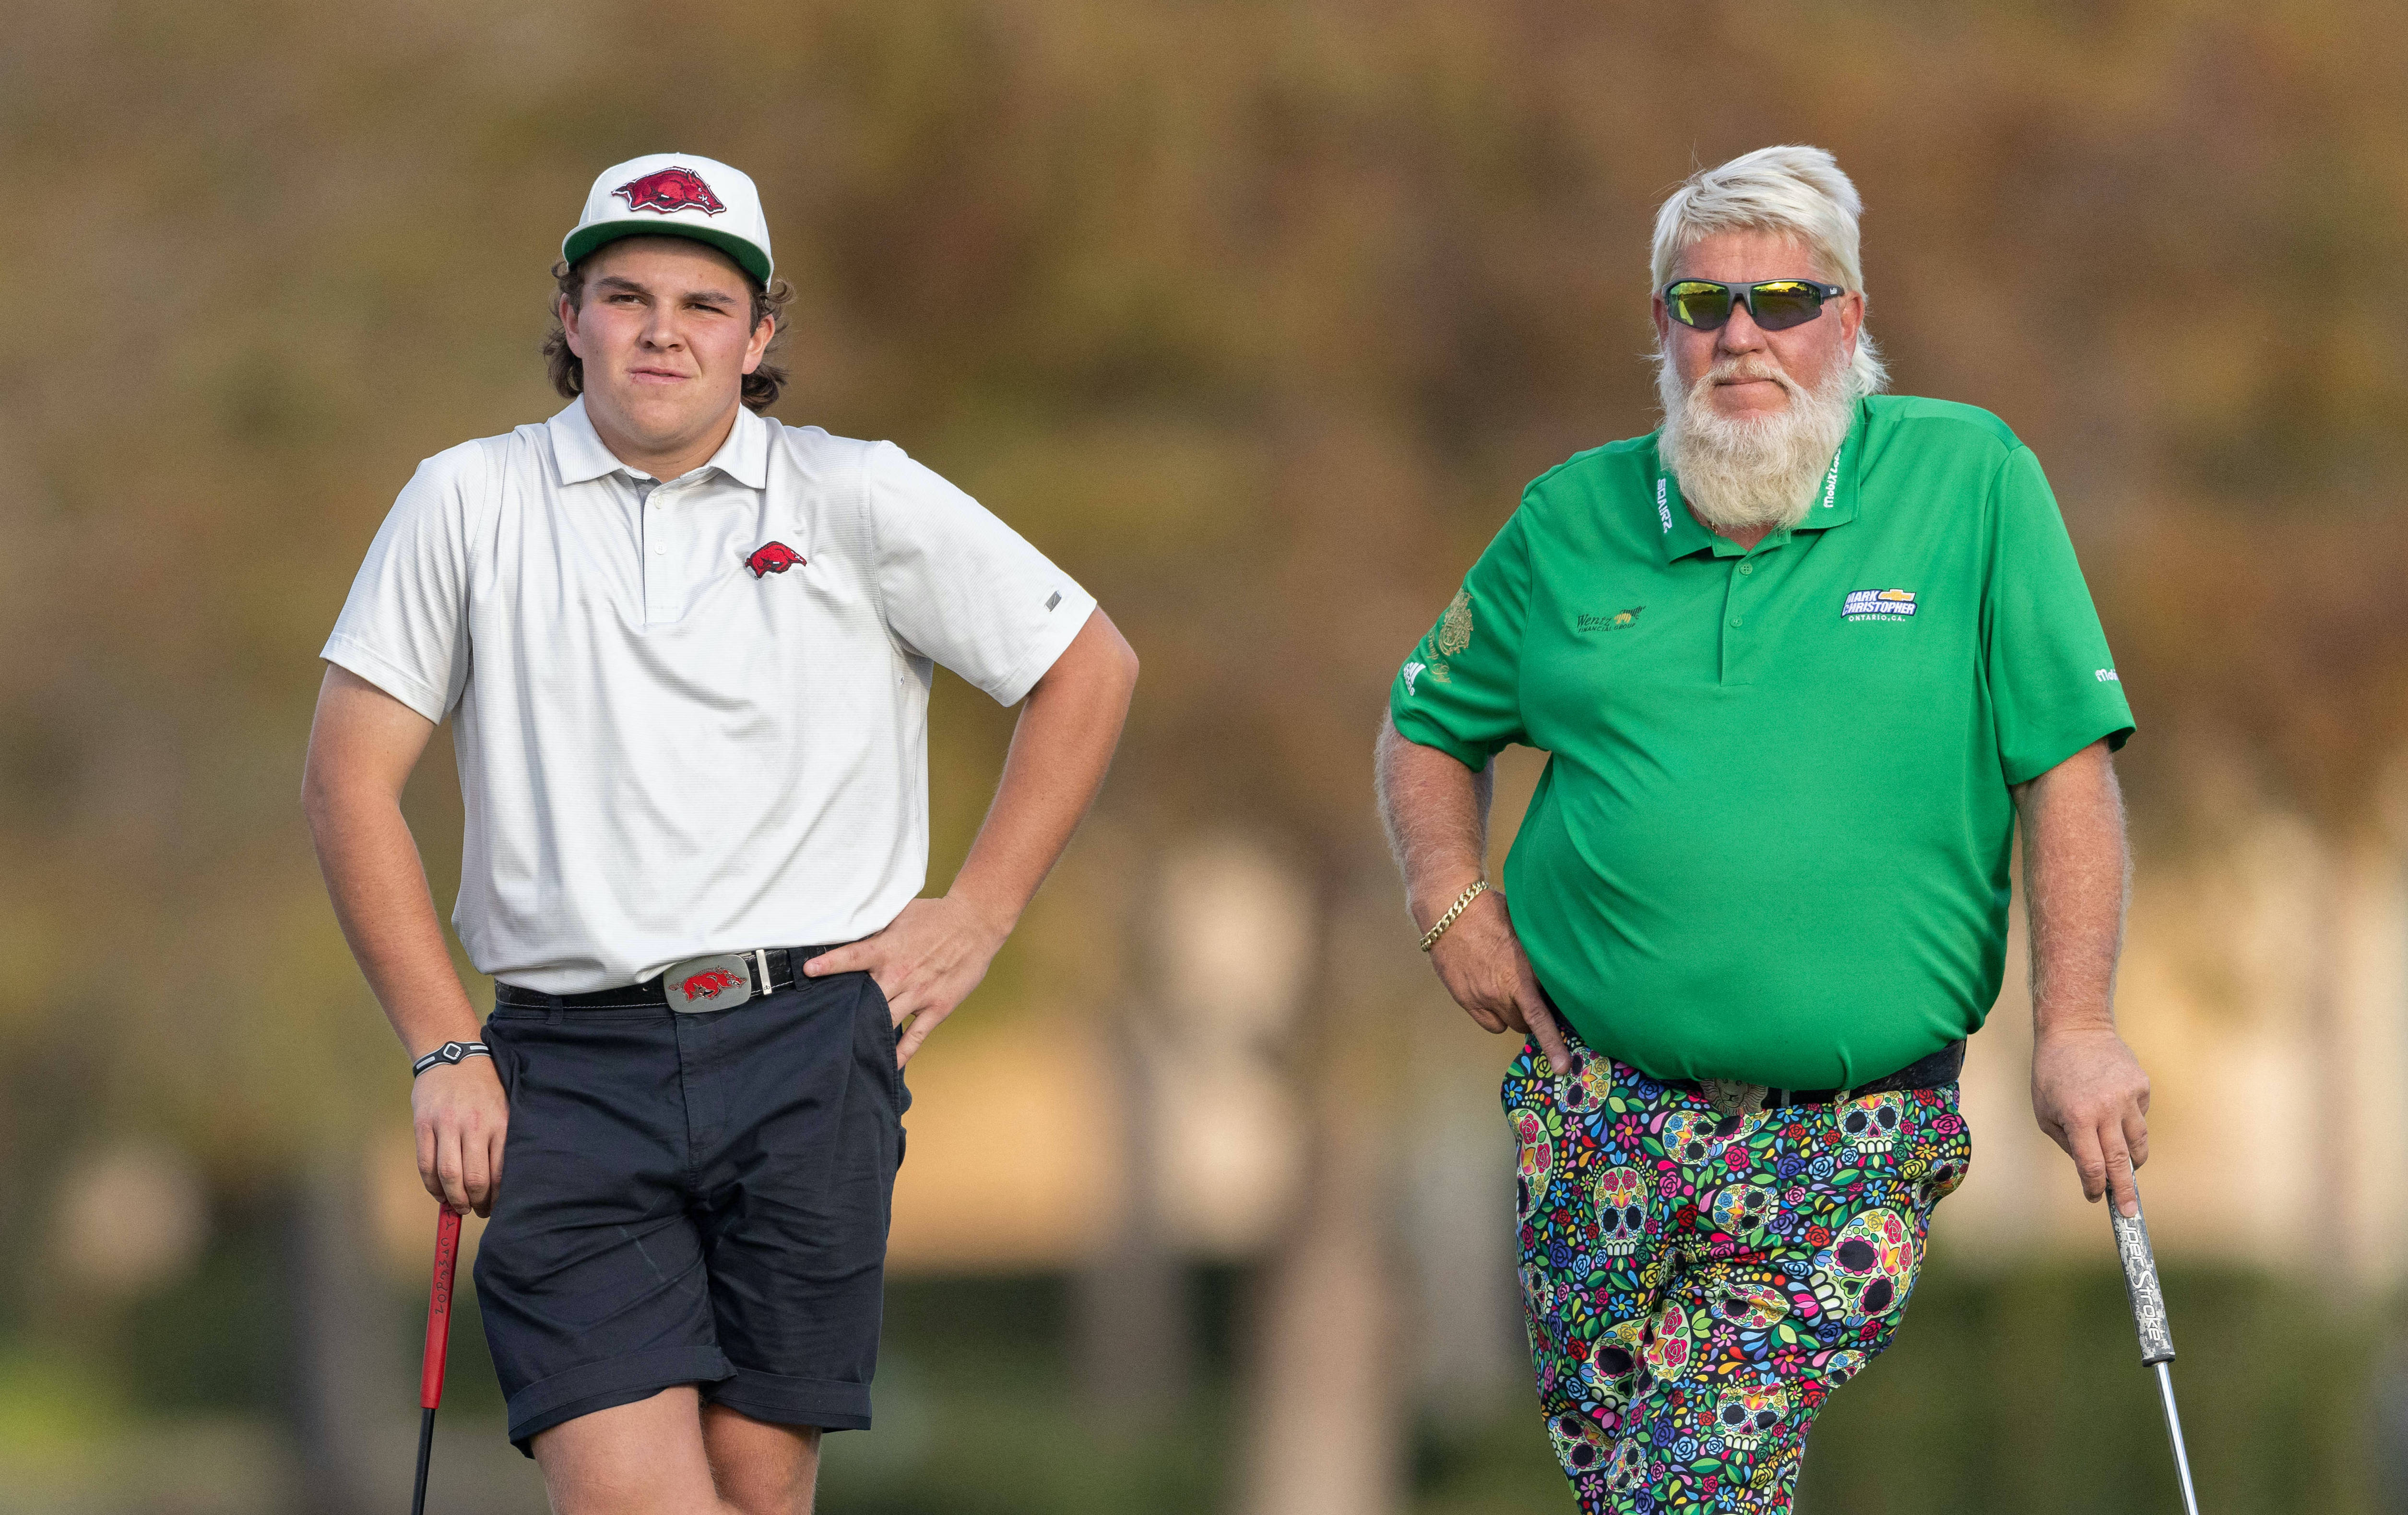 PNC Championship winners John Daly and son watch back 1991 USPGA together GolfMagic